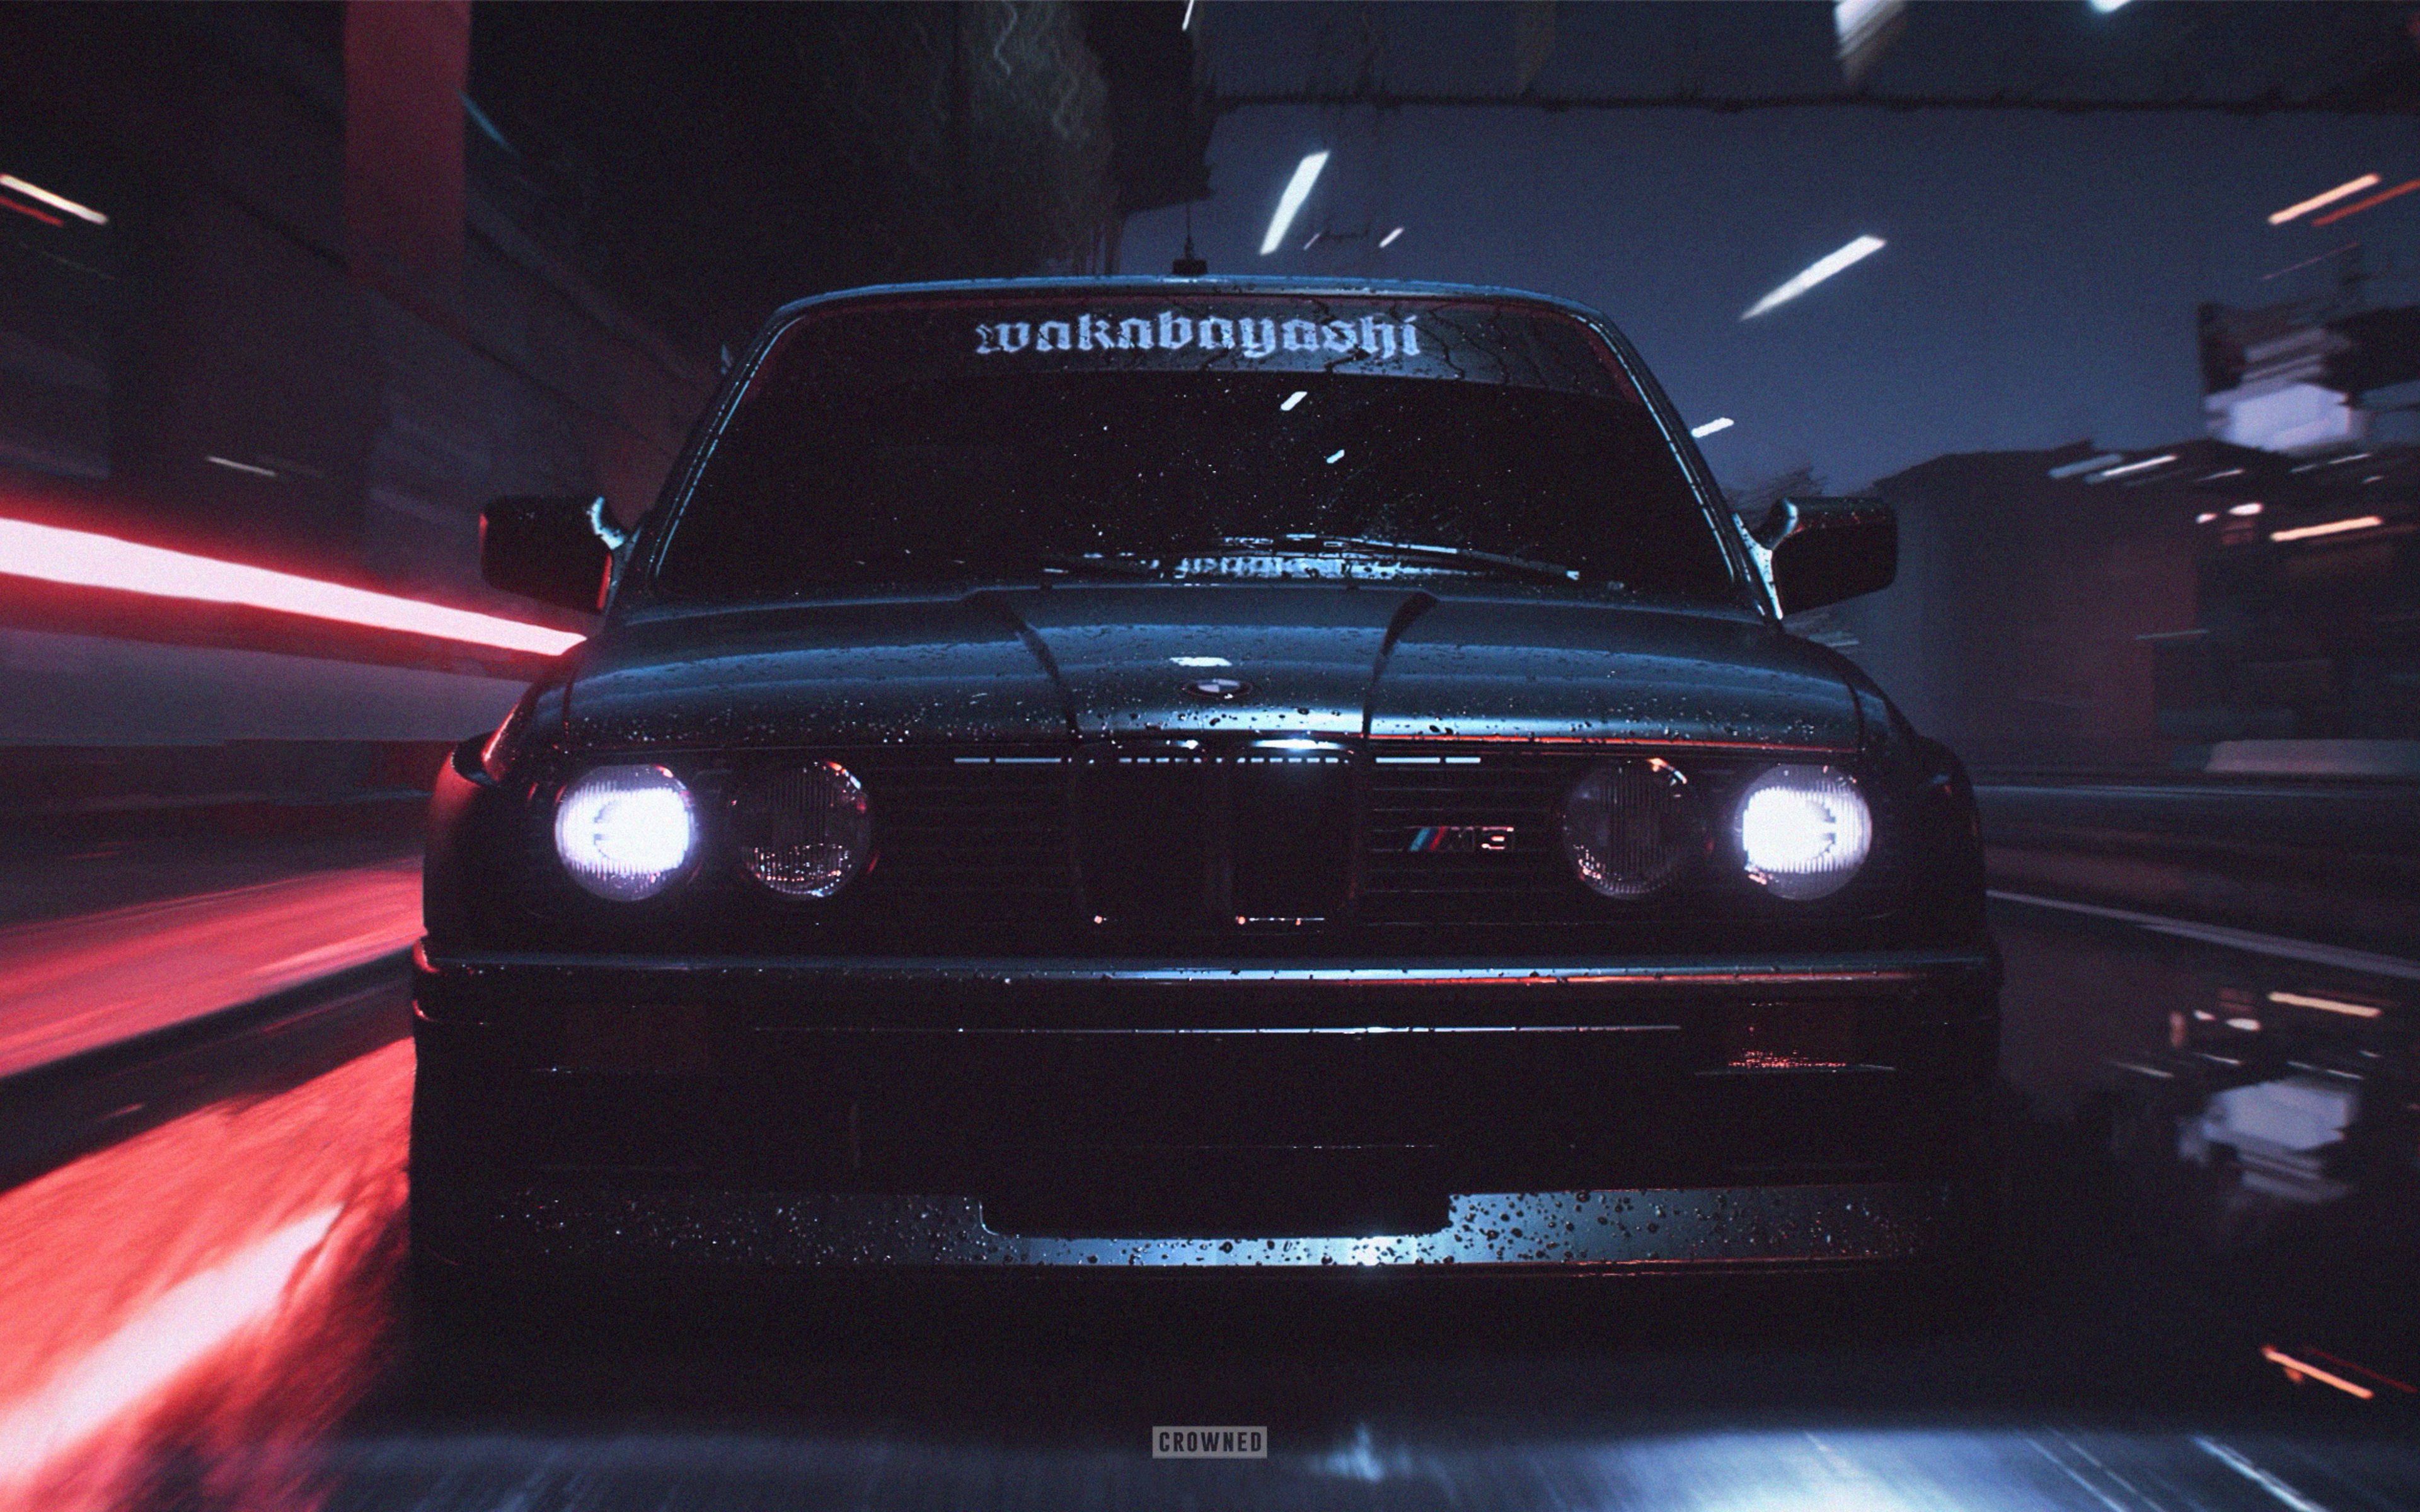 Phonk bass boosted. BMW m3 e30. BMW e34 неон.